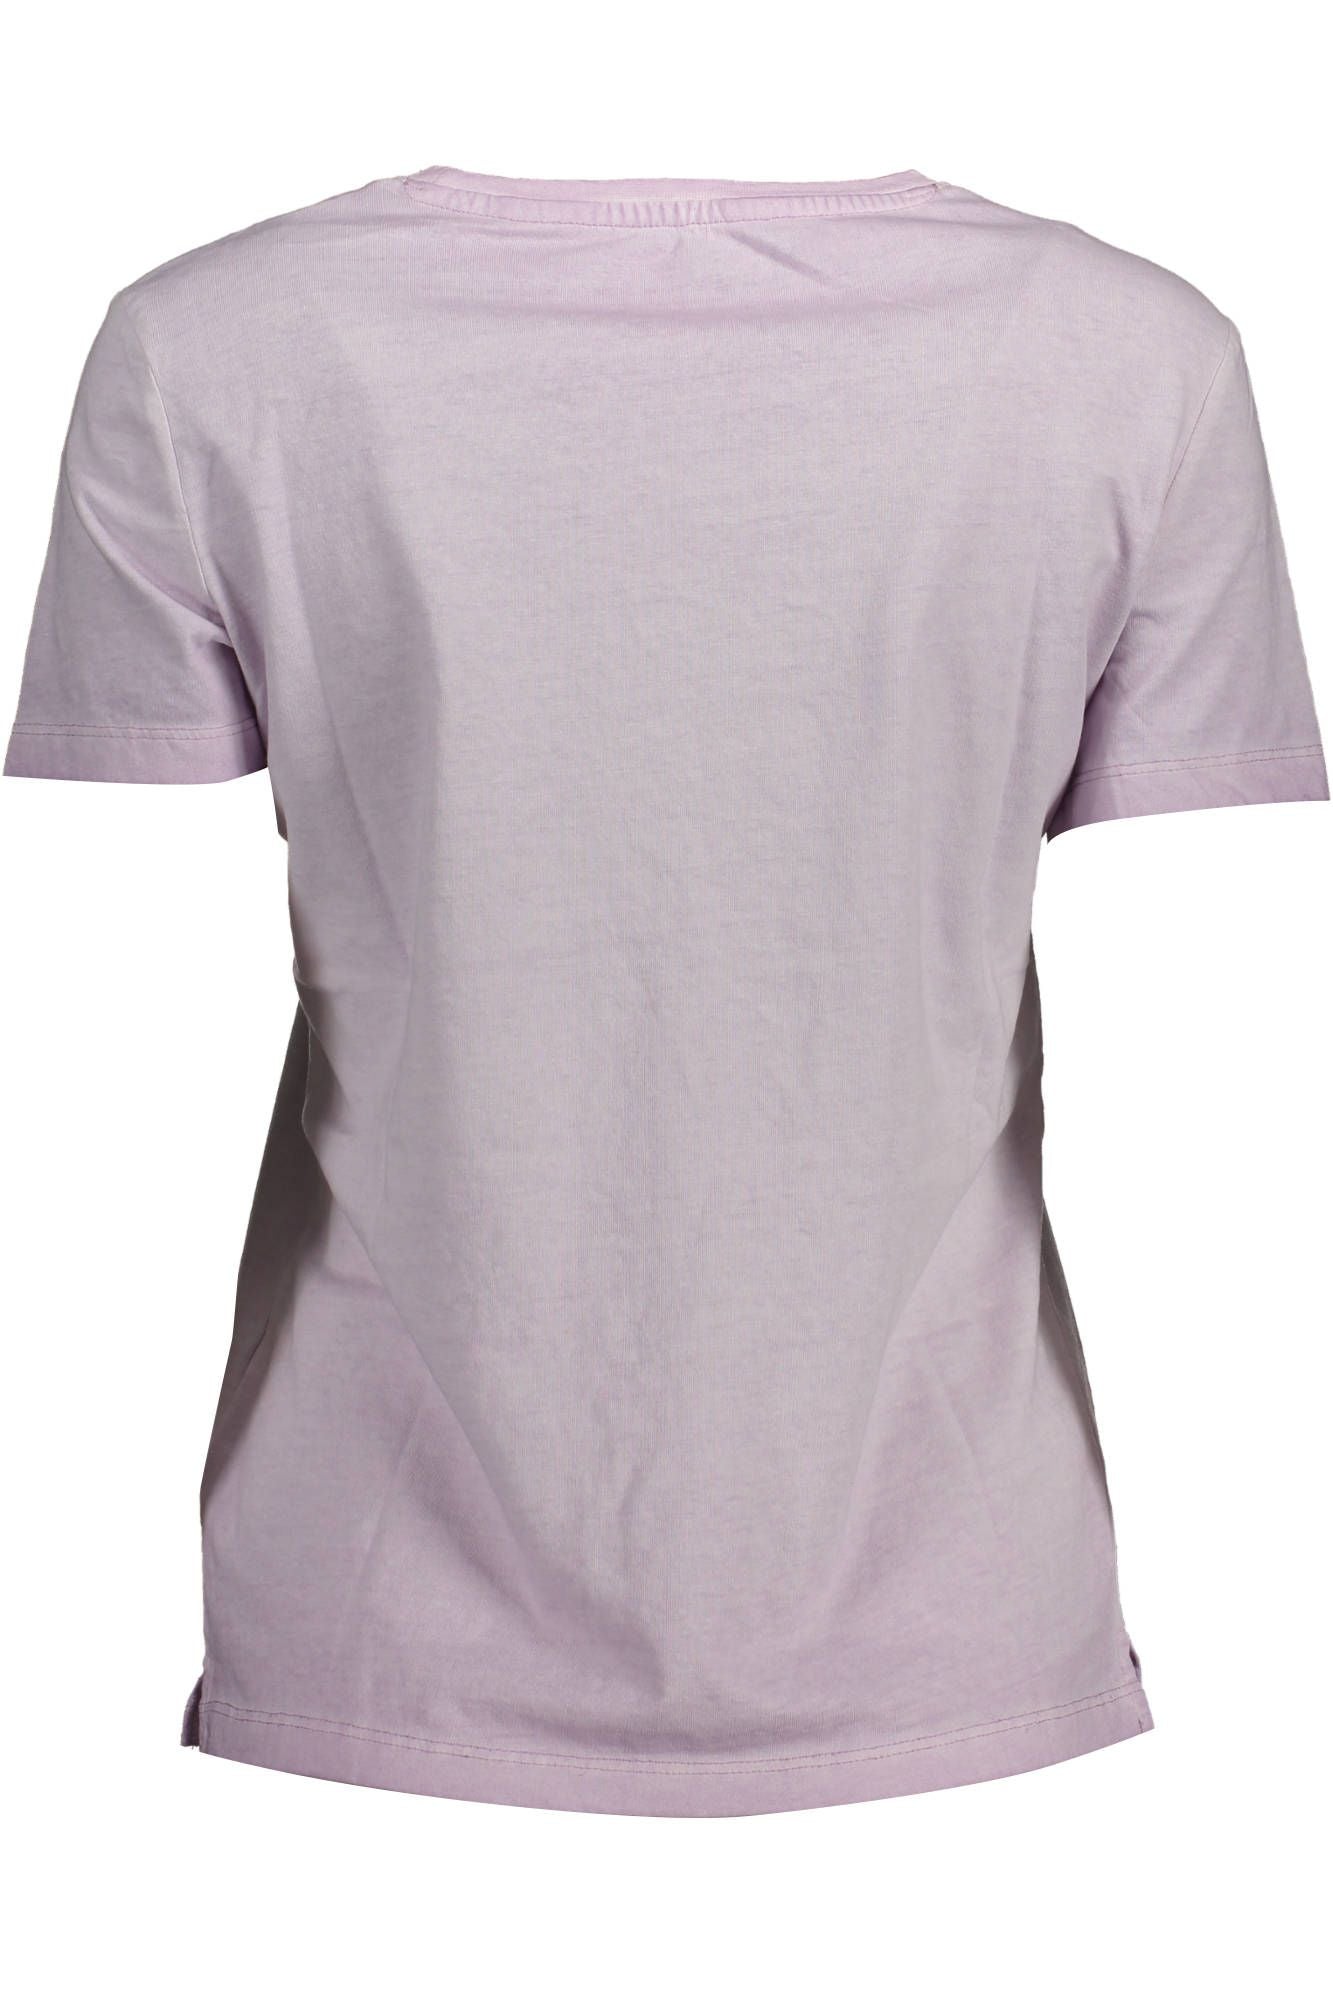 Chic Faded Pink Logo Tee